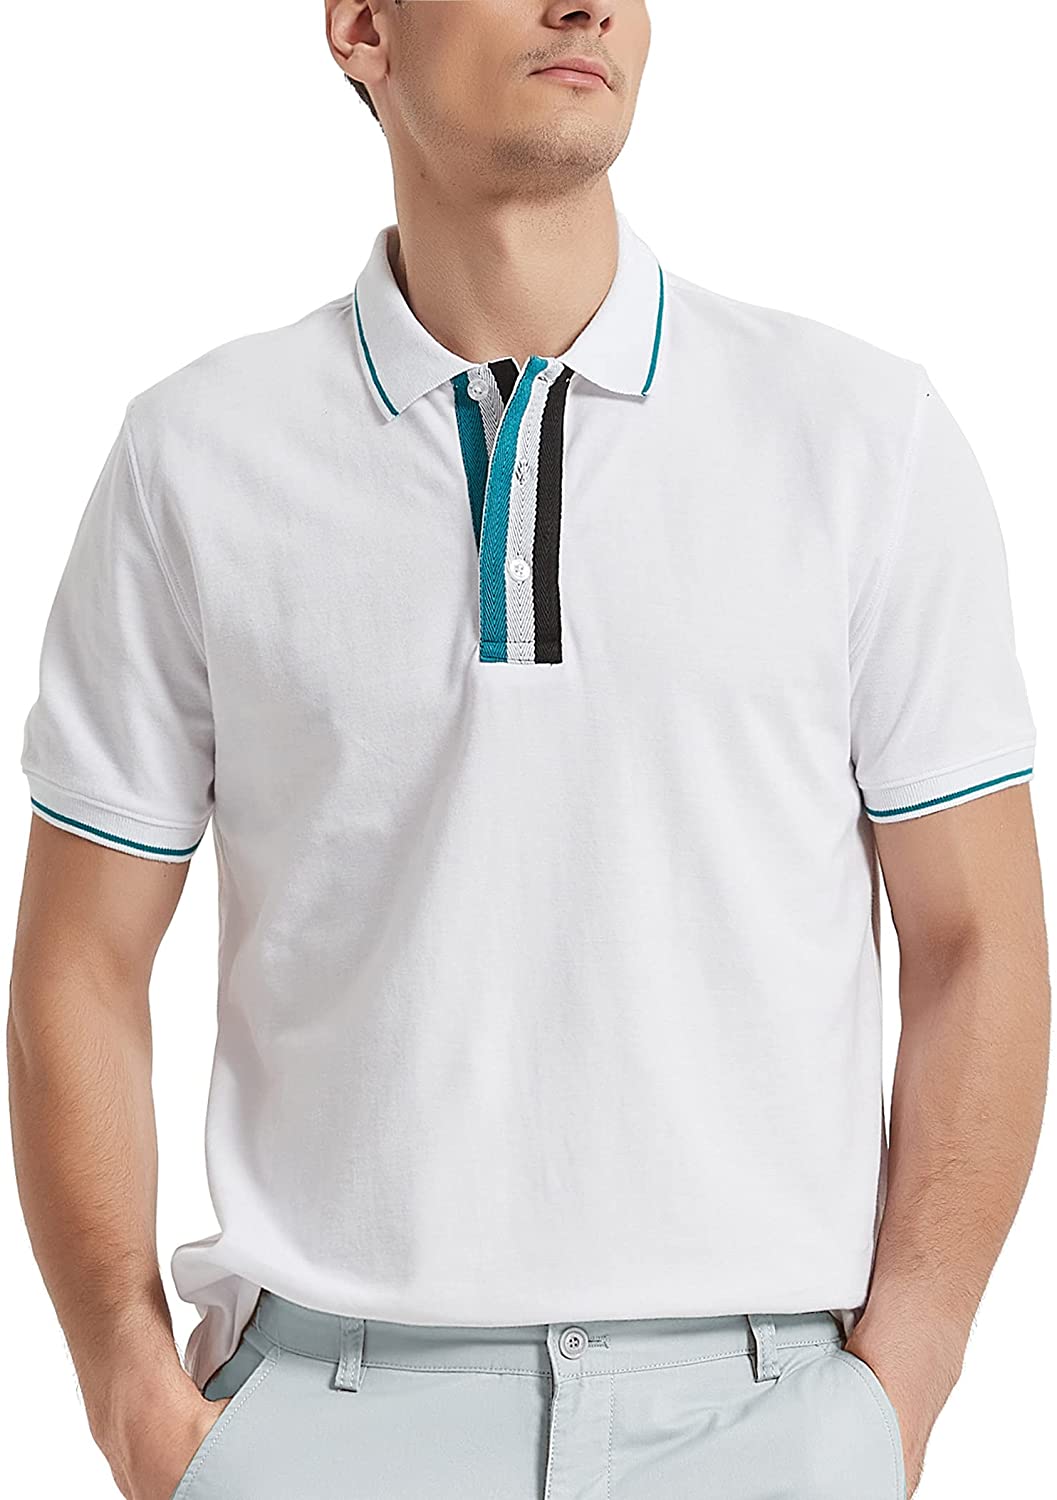 GAVIN BLEU Cotton Collared Polo Shirts for Men Classic Fit